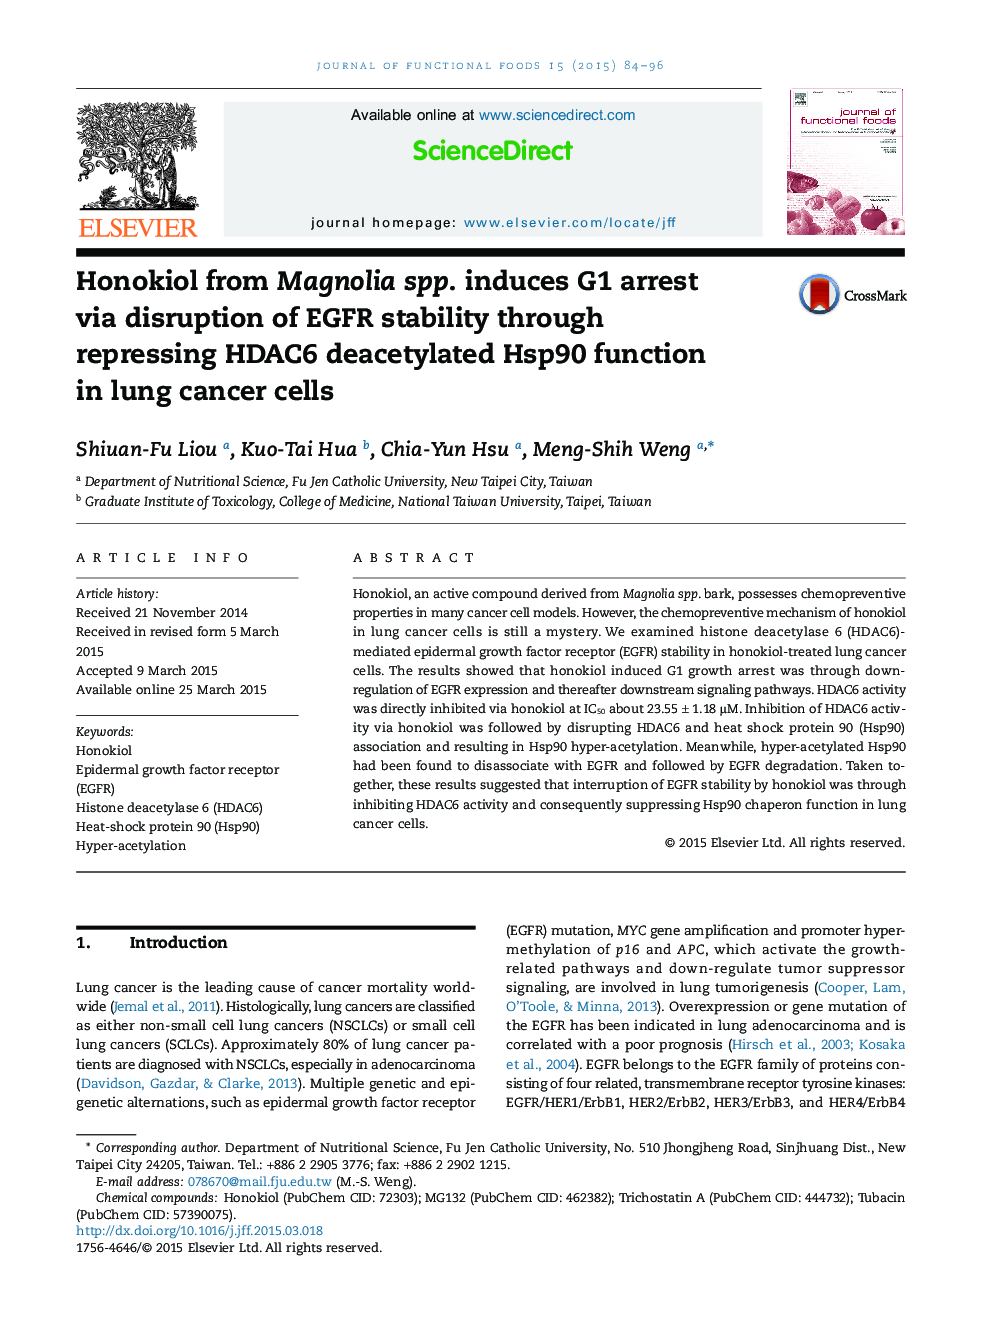 Honokiol from Magnolia spp. induces G1 arrest via disruption of EGFR stability through repressing HDAC6 deacetylated Hsp90 function in lung cancer cells